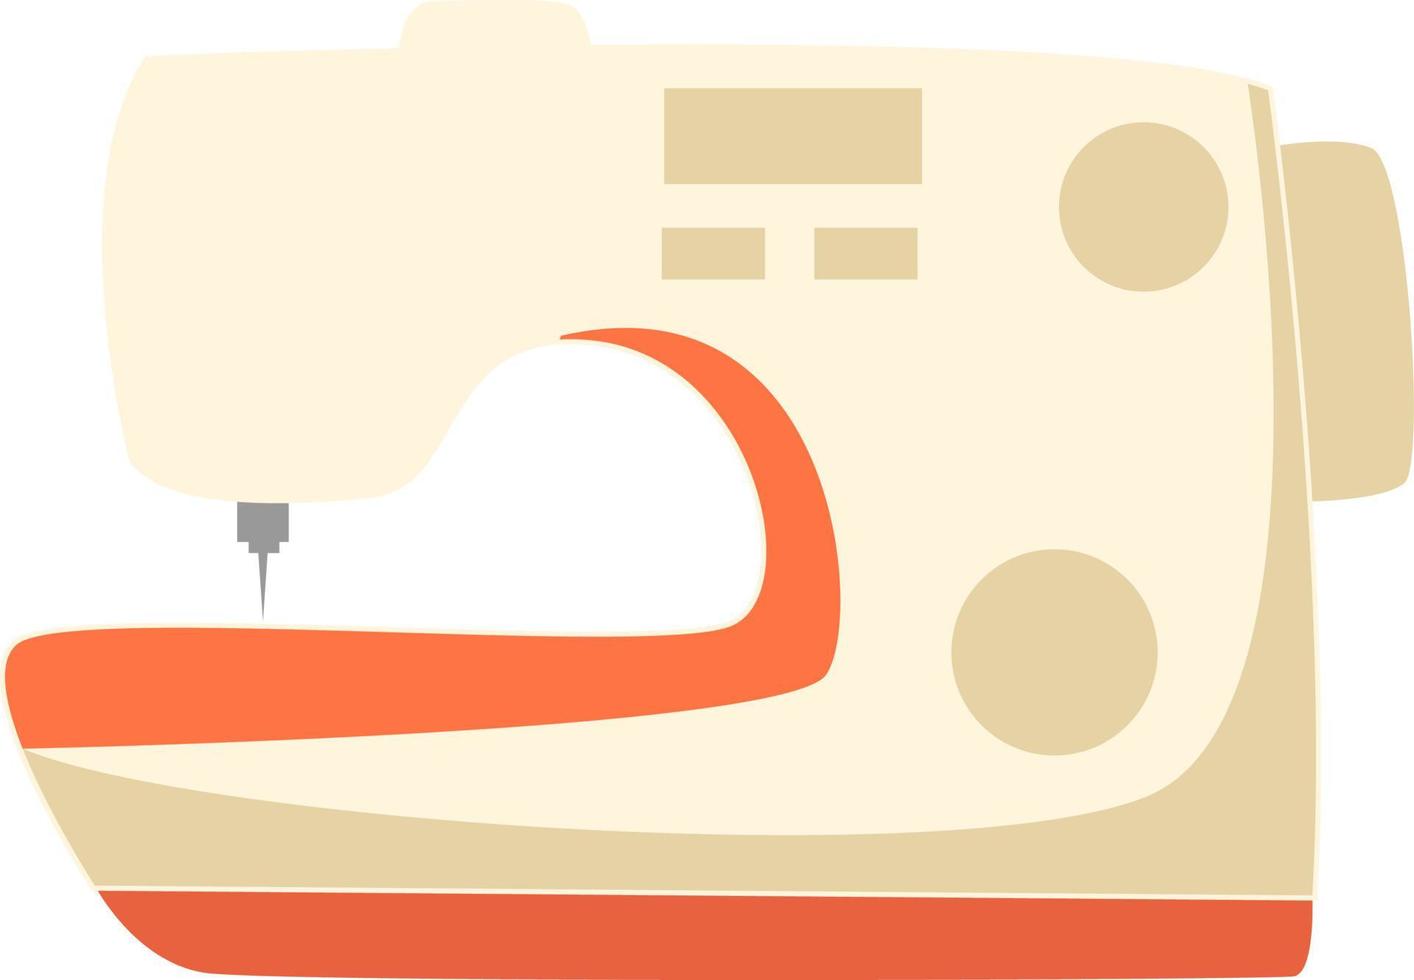 Sewing machine, illustration, vector on white background.